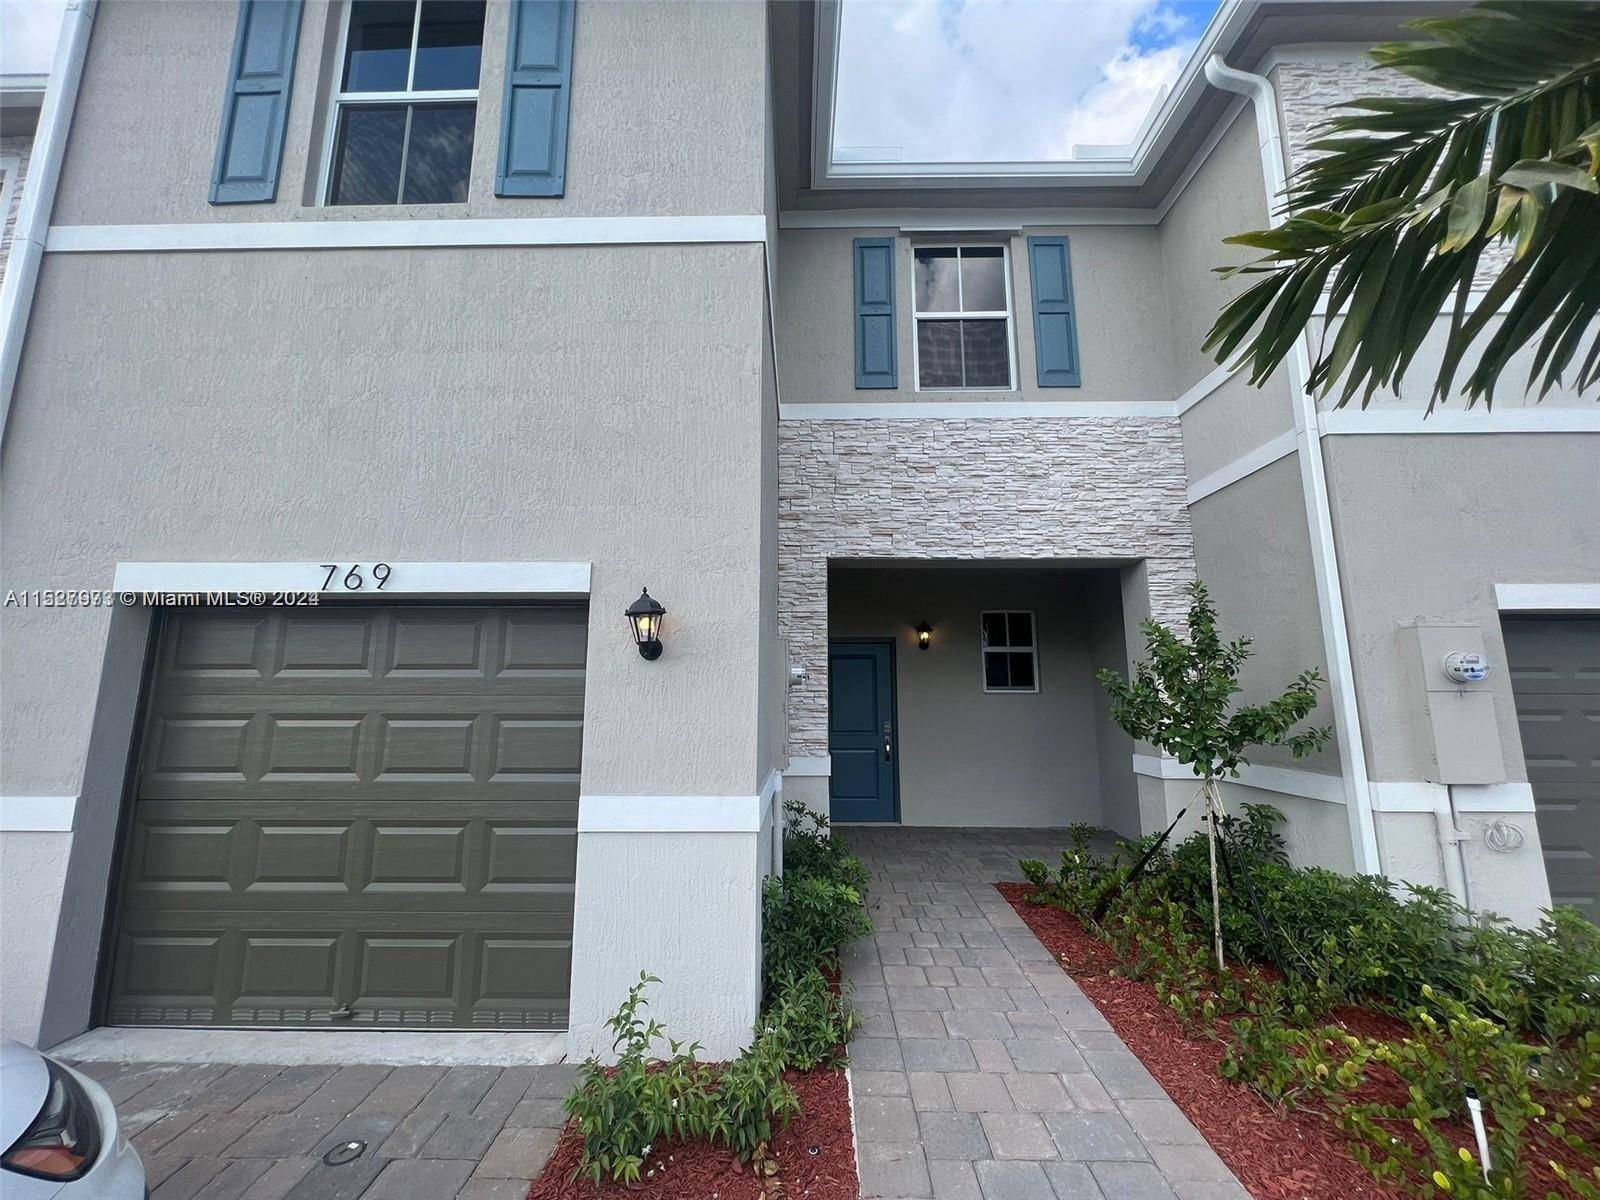 Beautiful townhouse for sale, excellent location, facing the clubhouse, featuring a large enclosed garage, 3 bedrooms 2 1 2 bedrooms, surrounded by supermarkets, schools, and golf course coming soon near ...